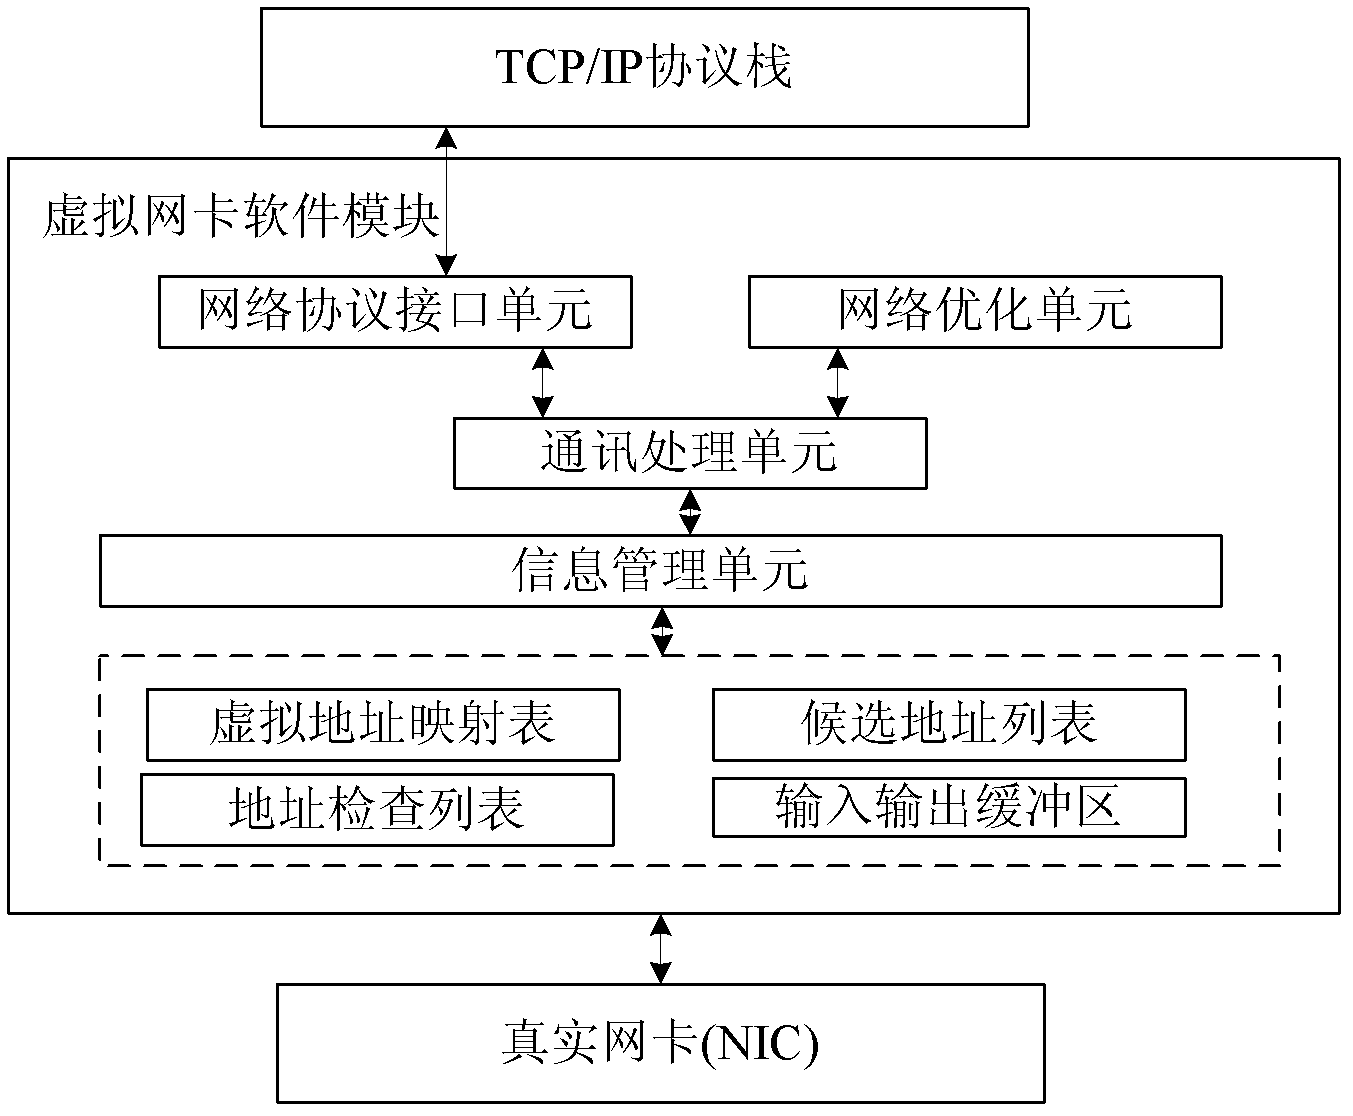 A virtual network card communication device applied to terminals of different local area networks to communicate with each other